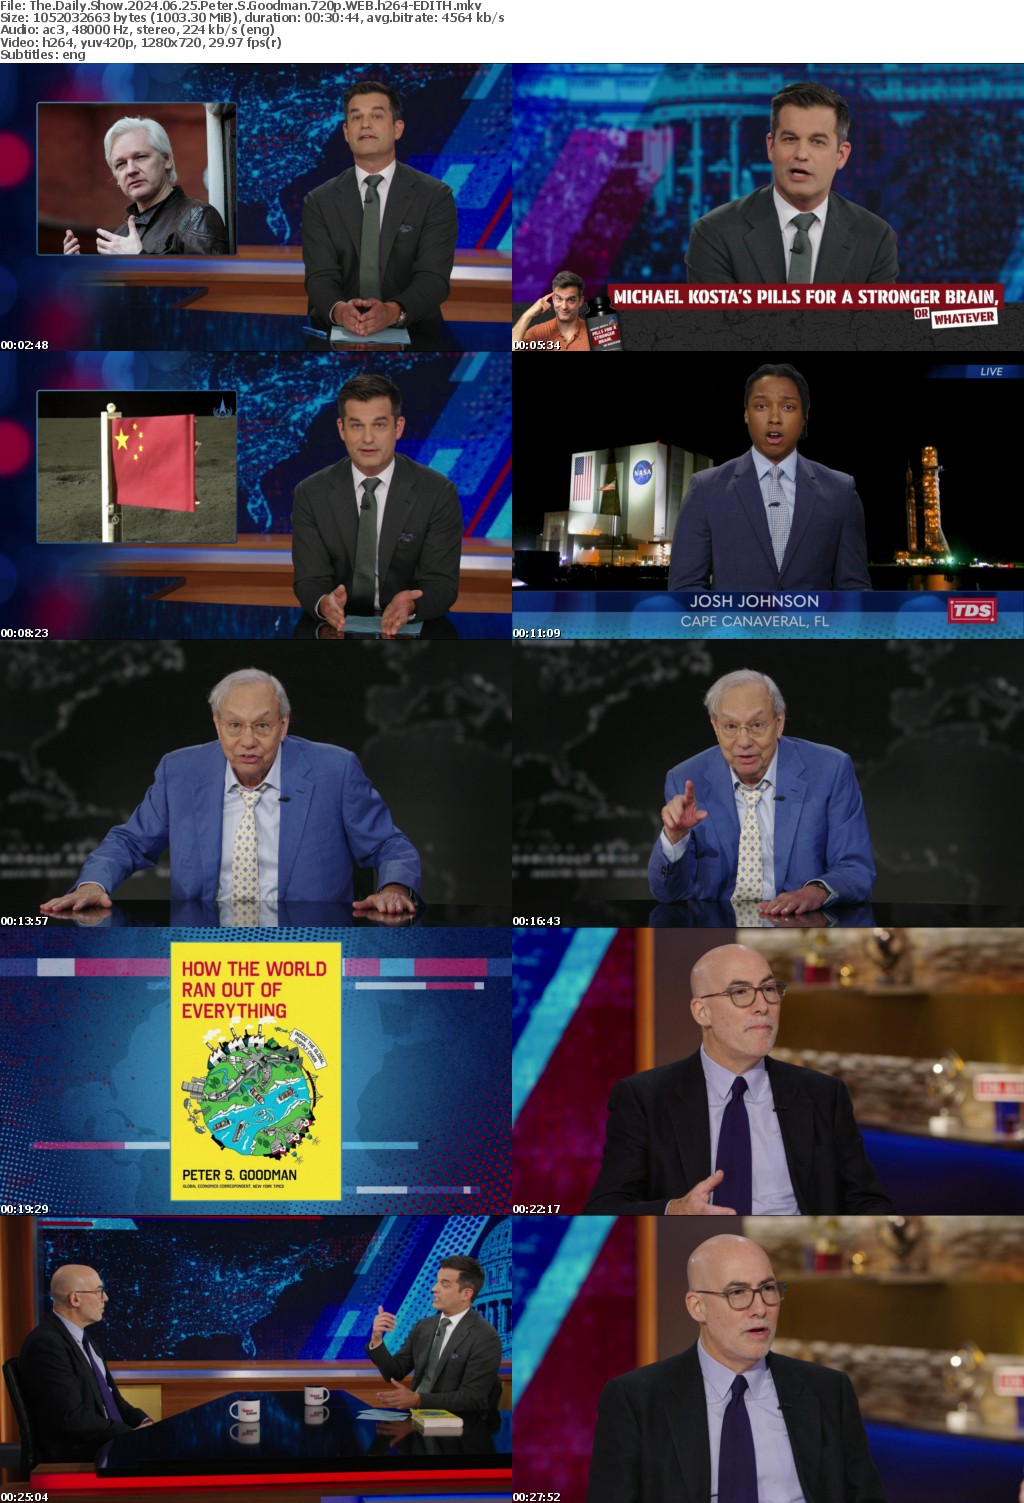 The Daily Show 2024 06 25 Peter S Goodman 720p WEB h264-EDITH